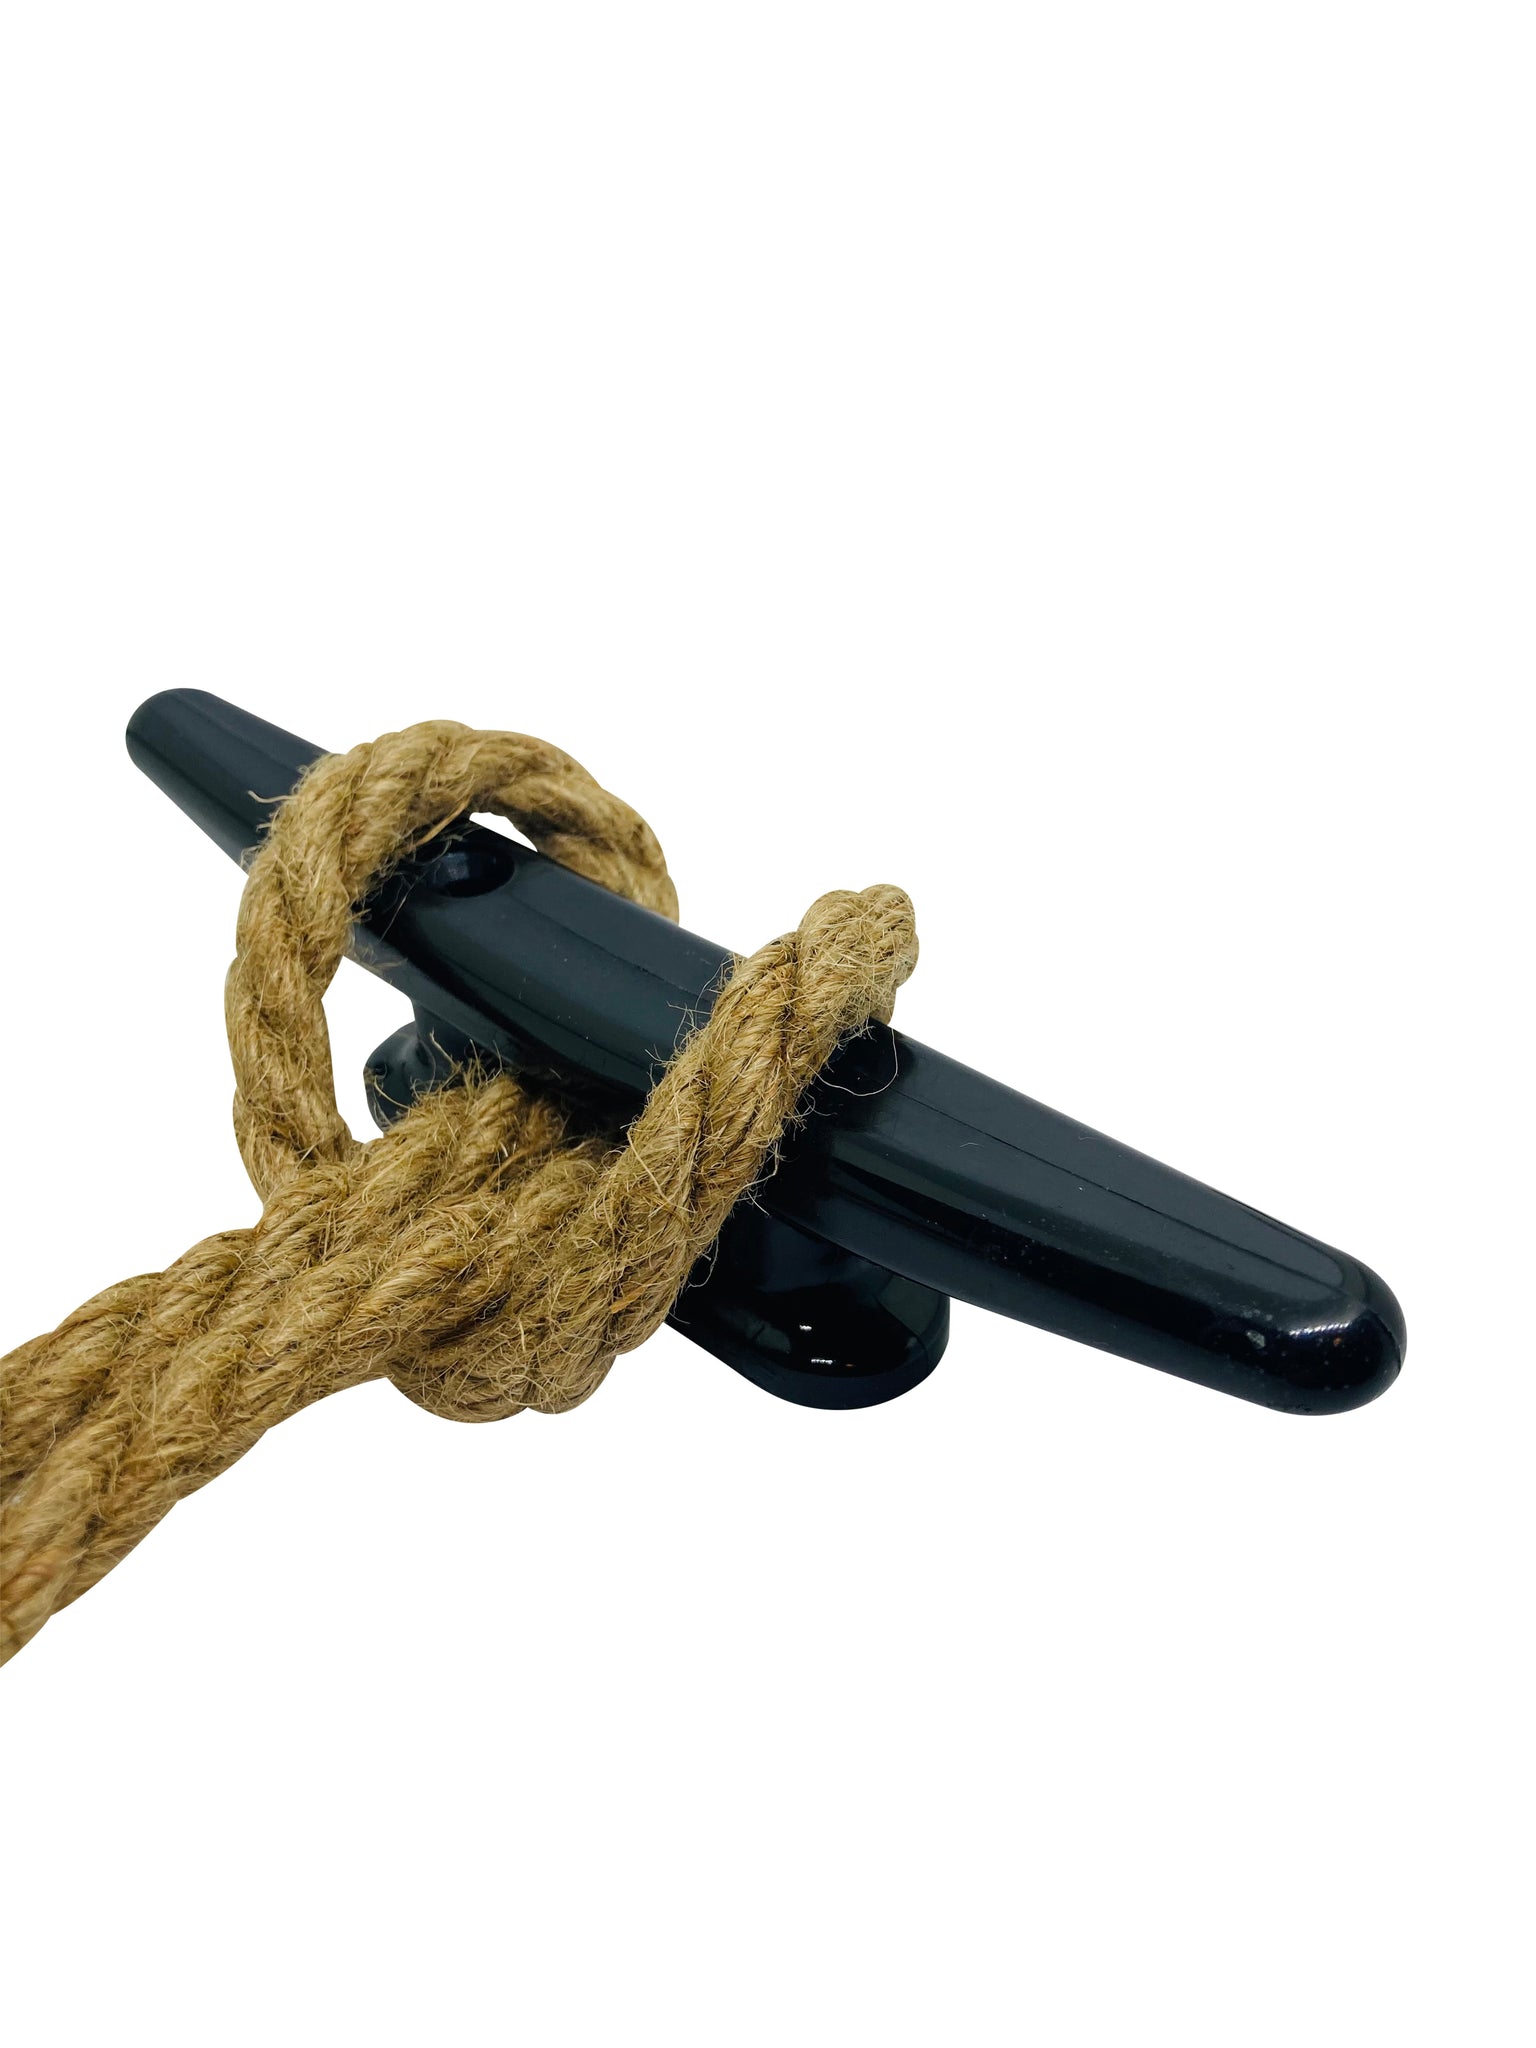 Deluxe Nautical Knot Tying Kit – ReferenceReady